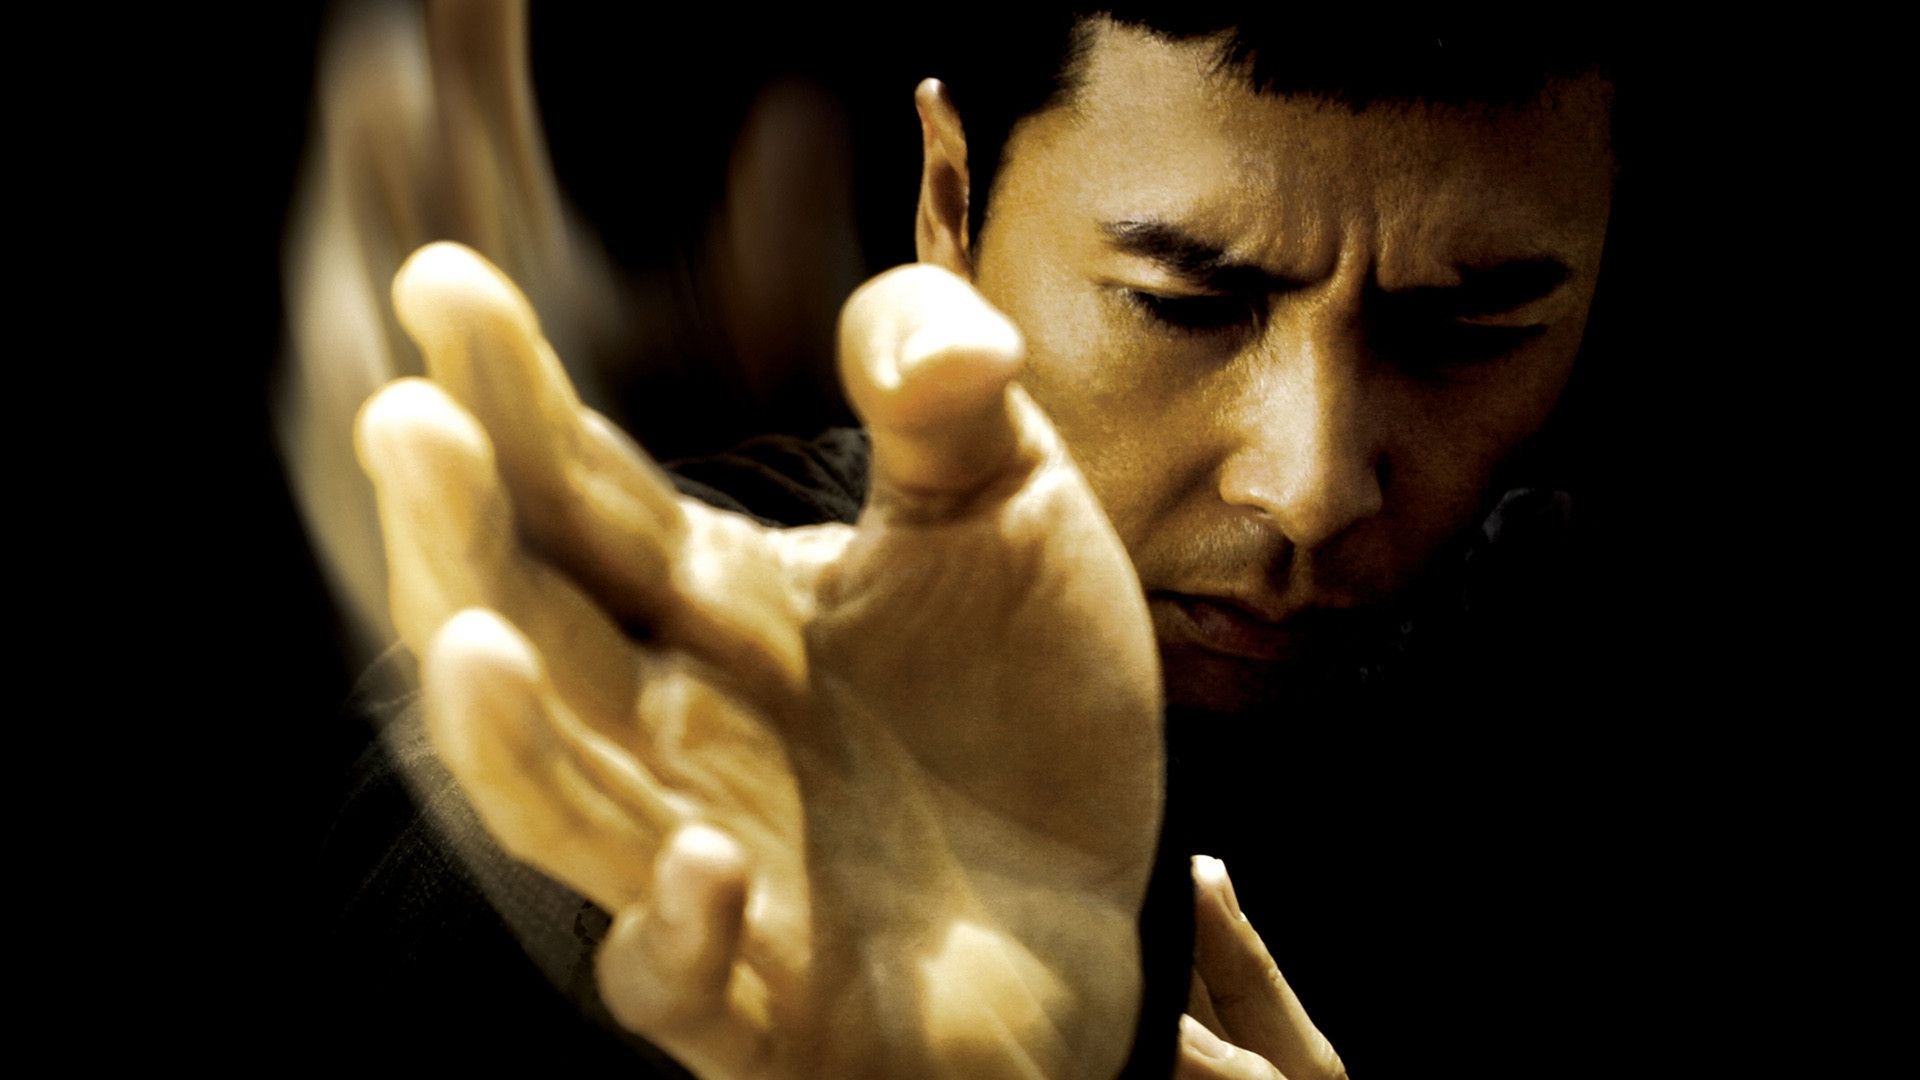 Collection of some Best Martial Arts Wallpapers - All HD Wallpapers